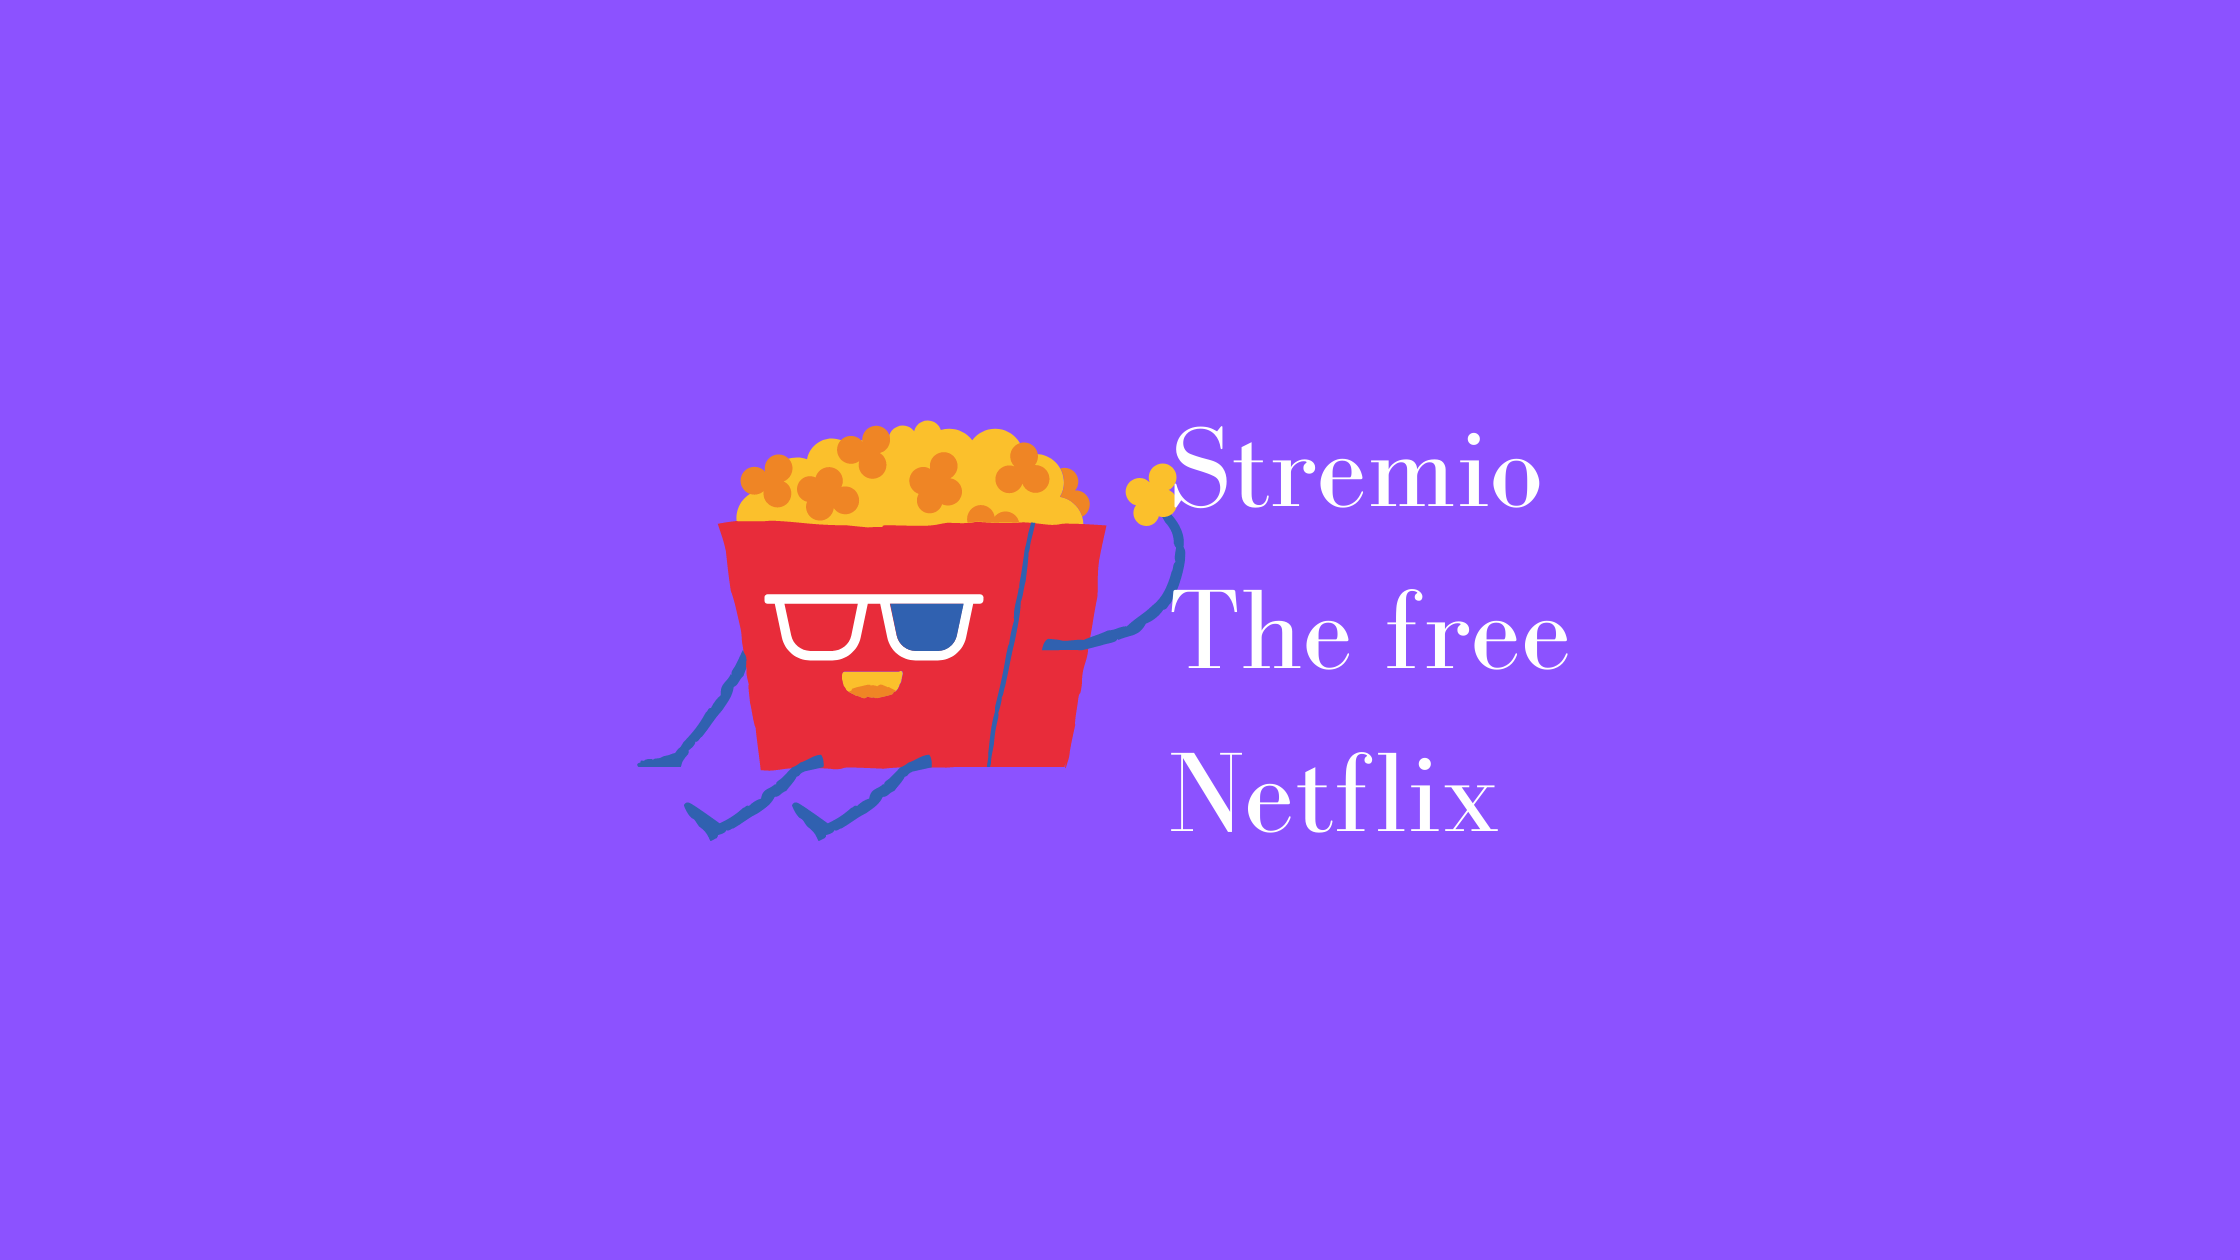 So i used Stremio to see movies, shows and animes. it works on